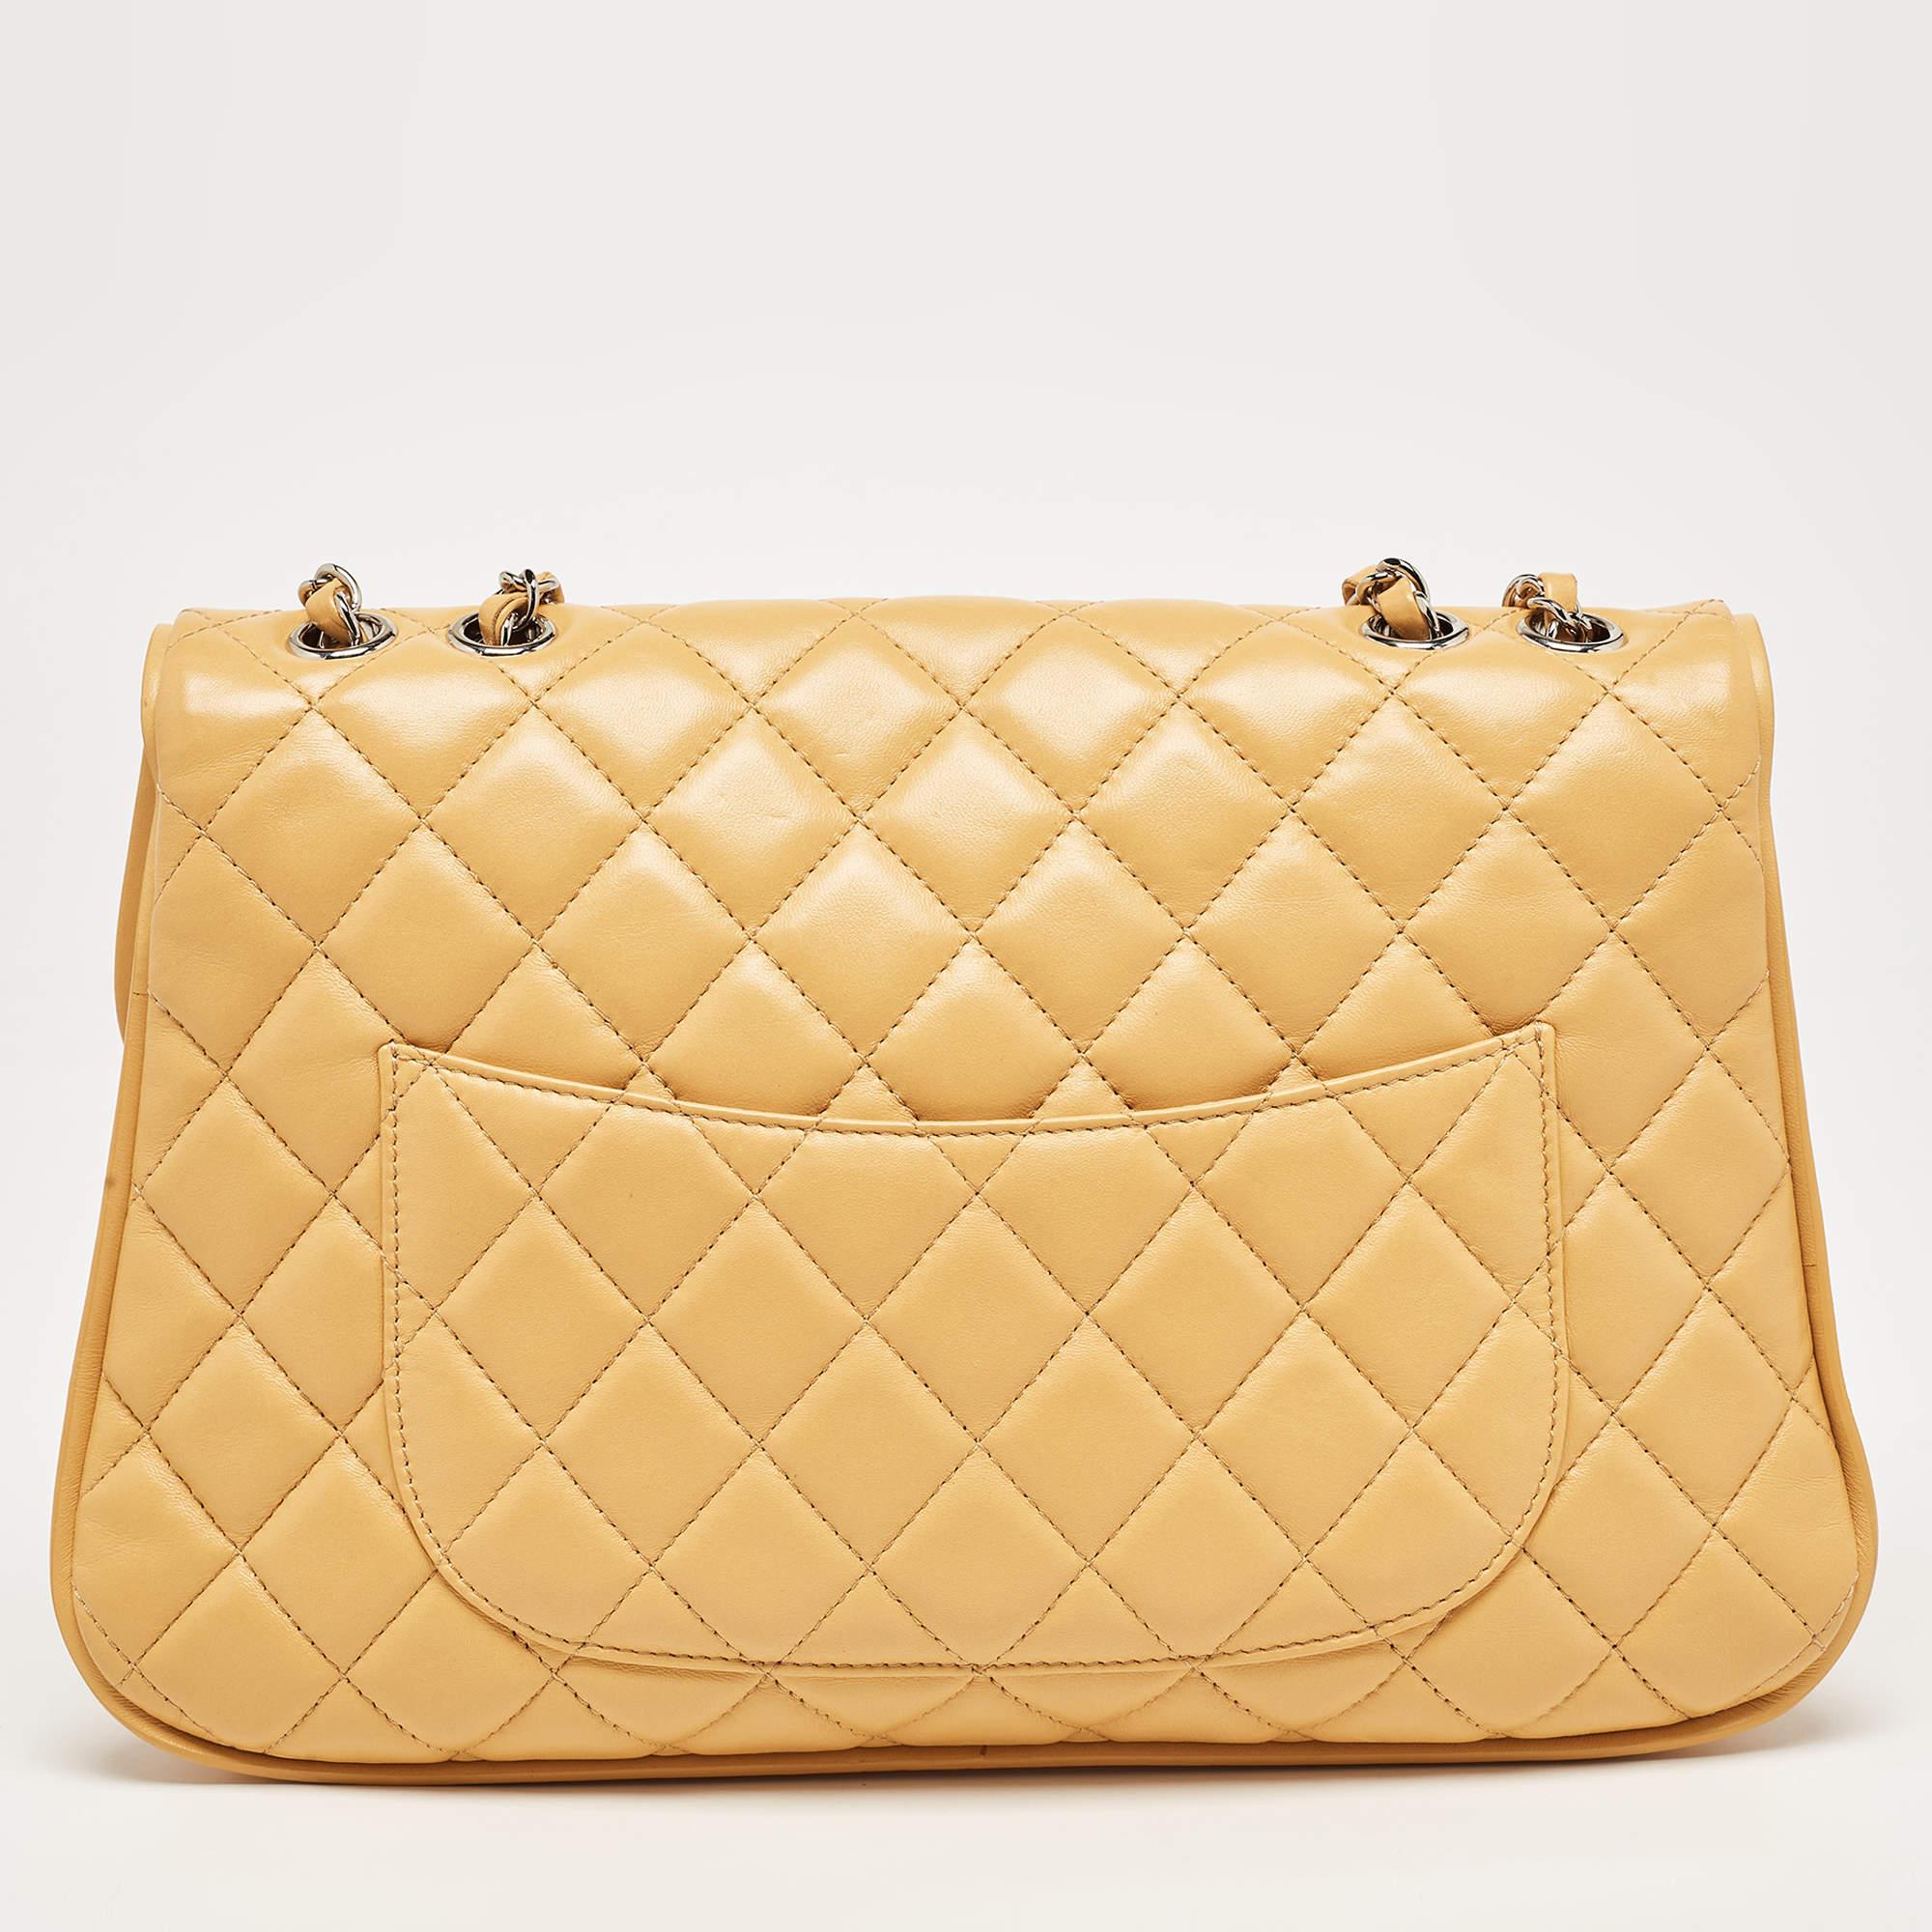 Chanel Yellow Quilted Leather Large Pagode Piping Flap Bag For Sale 11